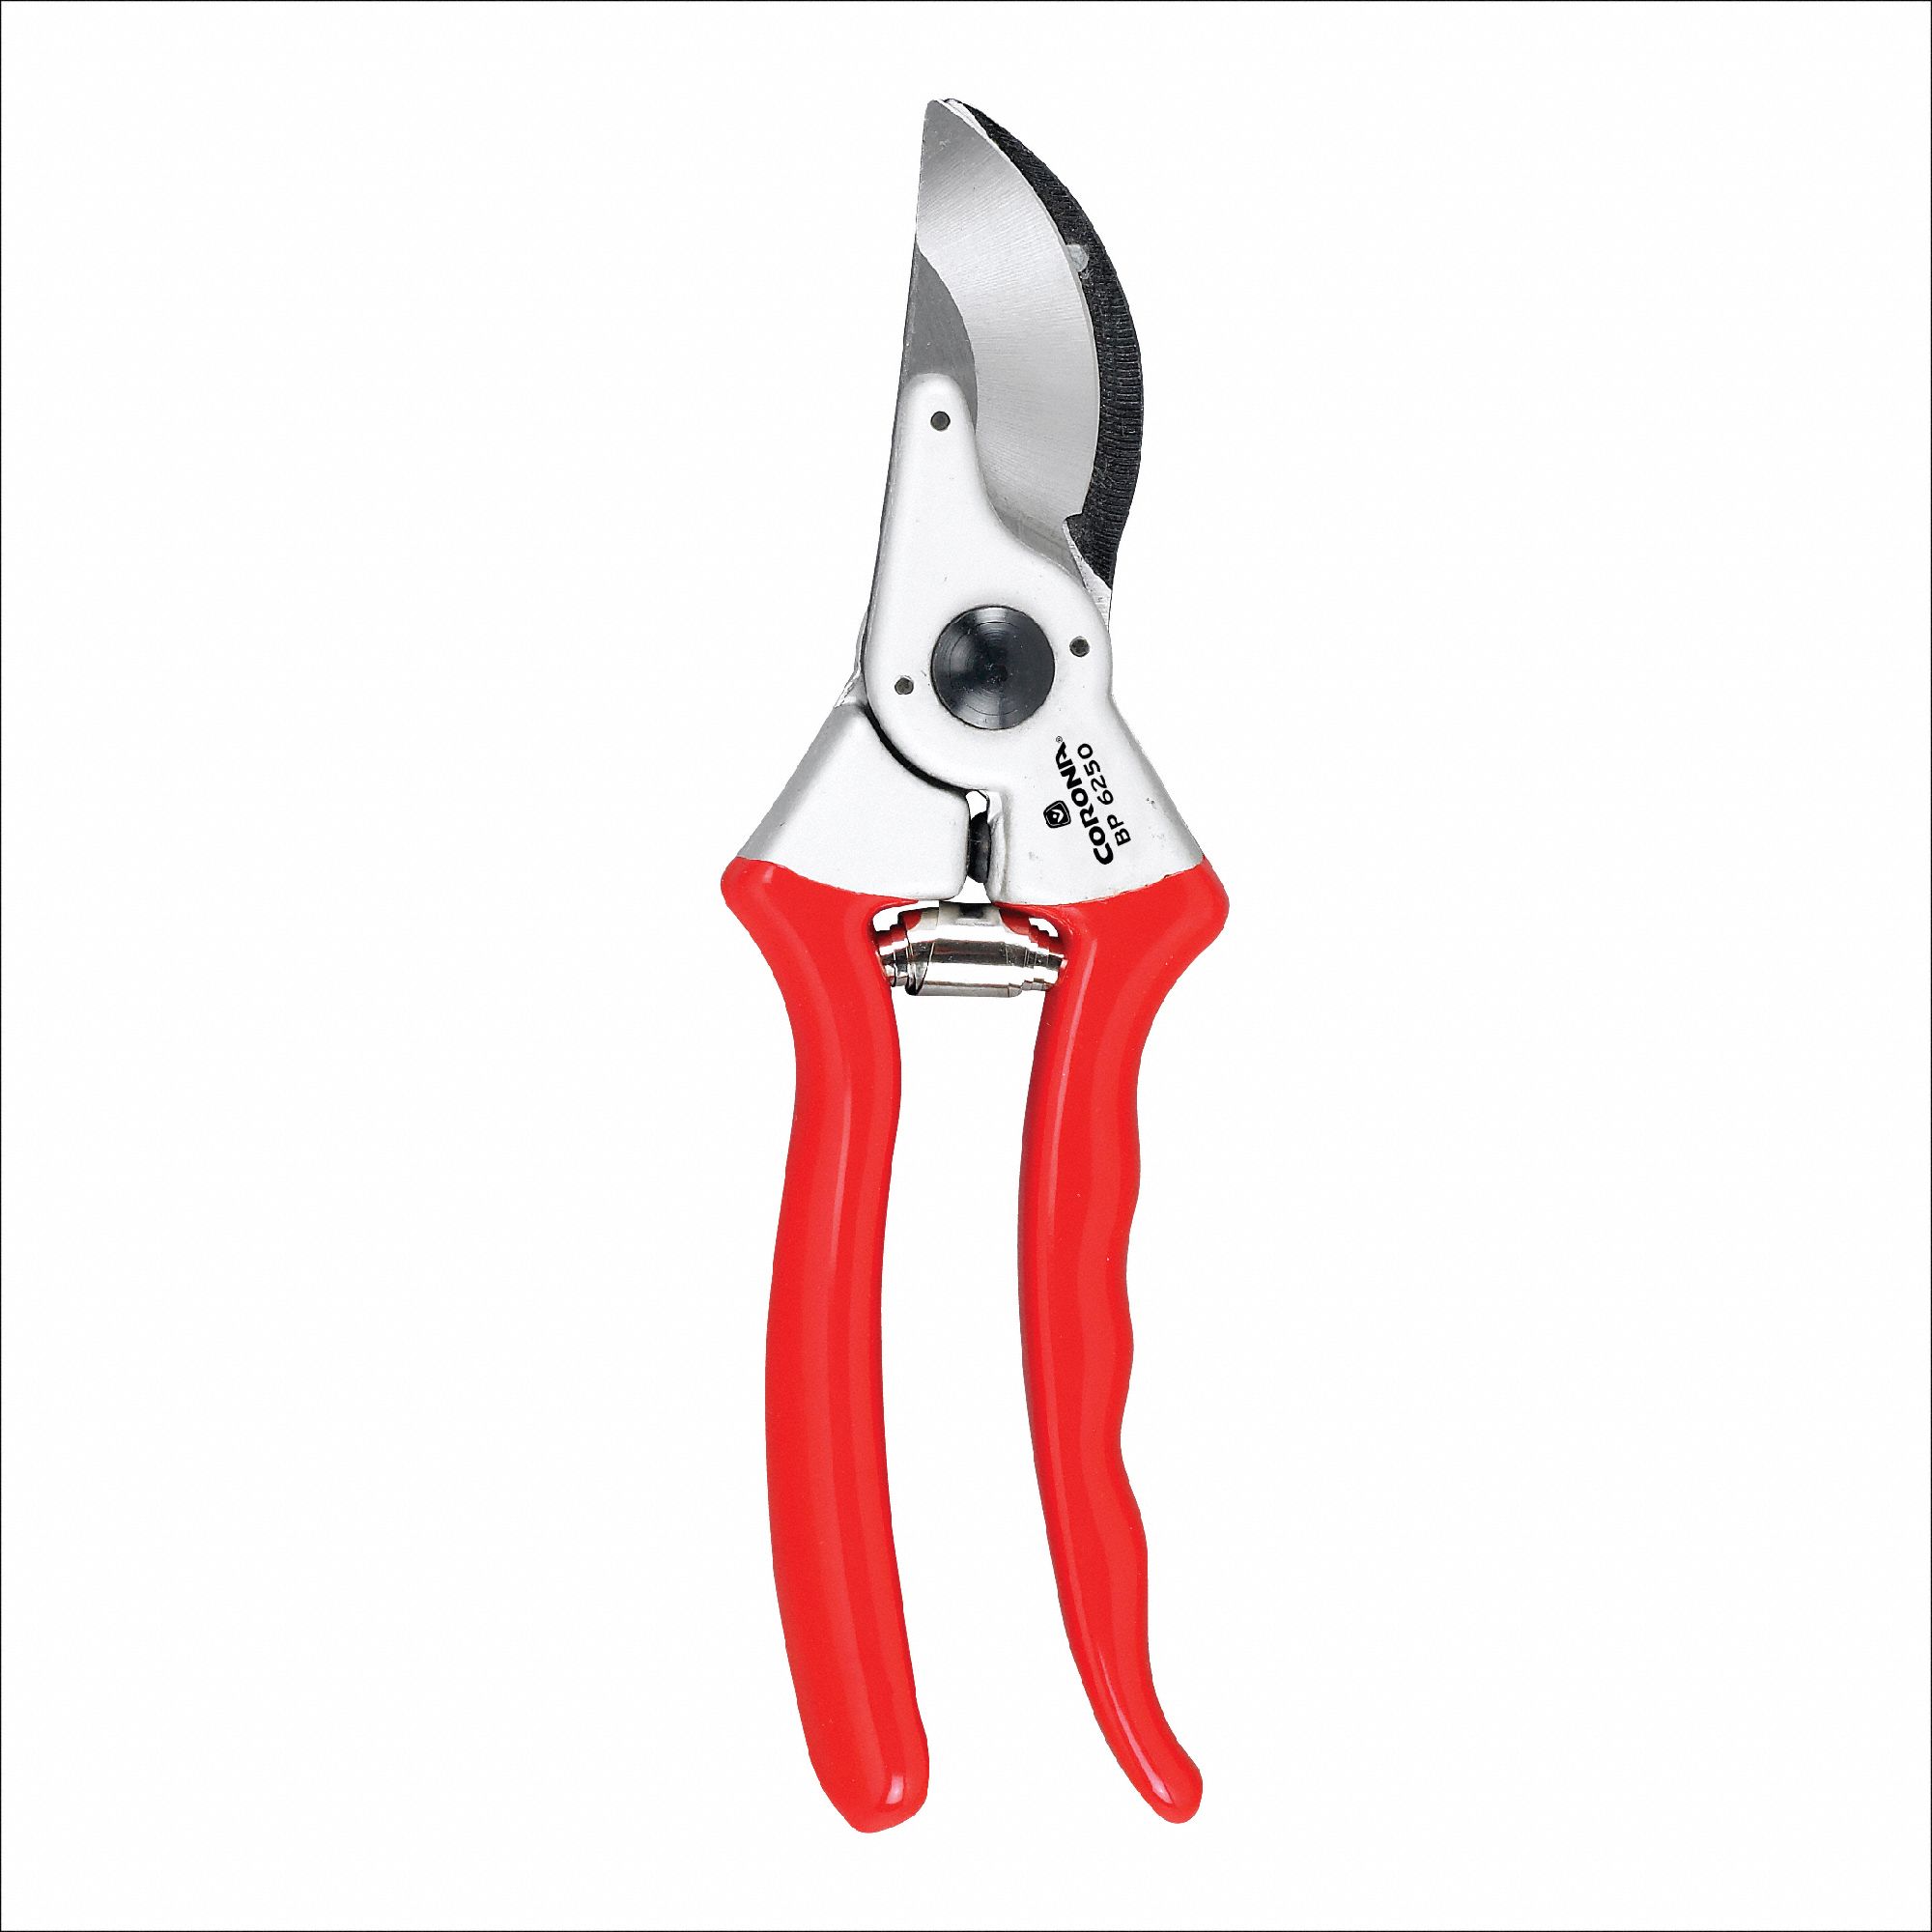 Bypass Pruner: 2 3/4 in Blade Lg, 8 1/2 in Overall Lg, 1 in, Steel, Metal